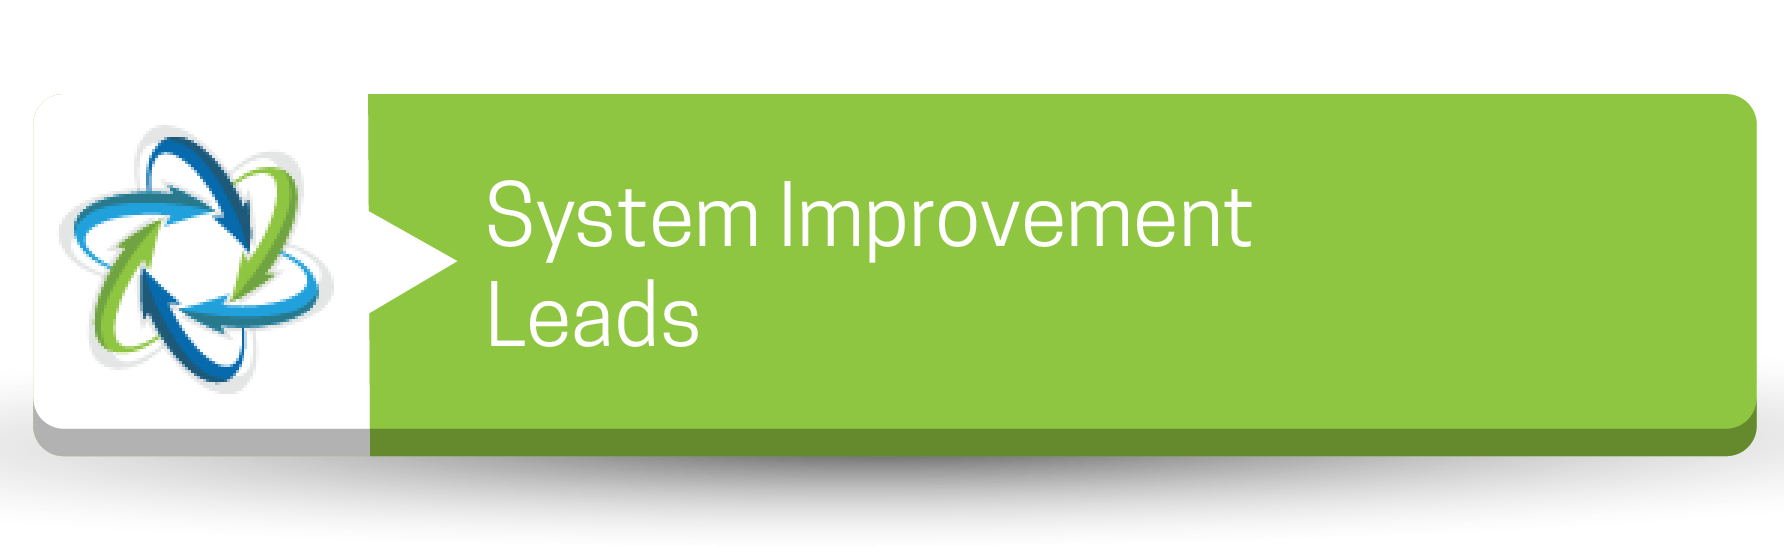 System Improvement Leads Button